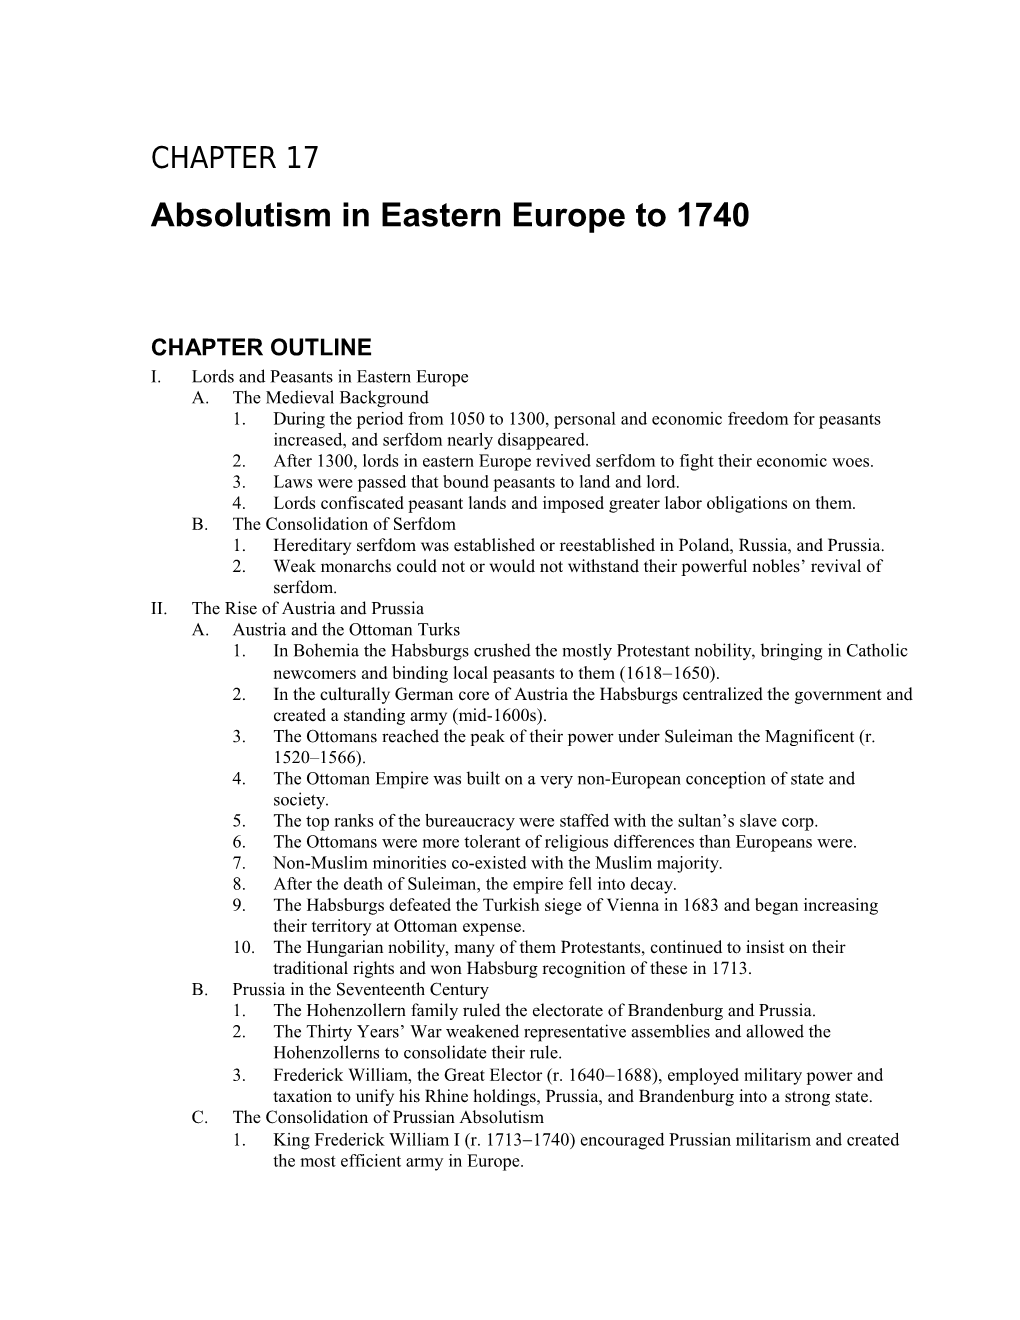 Chapter 17: Absolutism in Eastern Europe to 1740 1